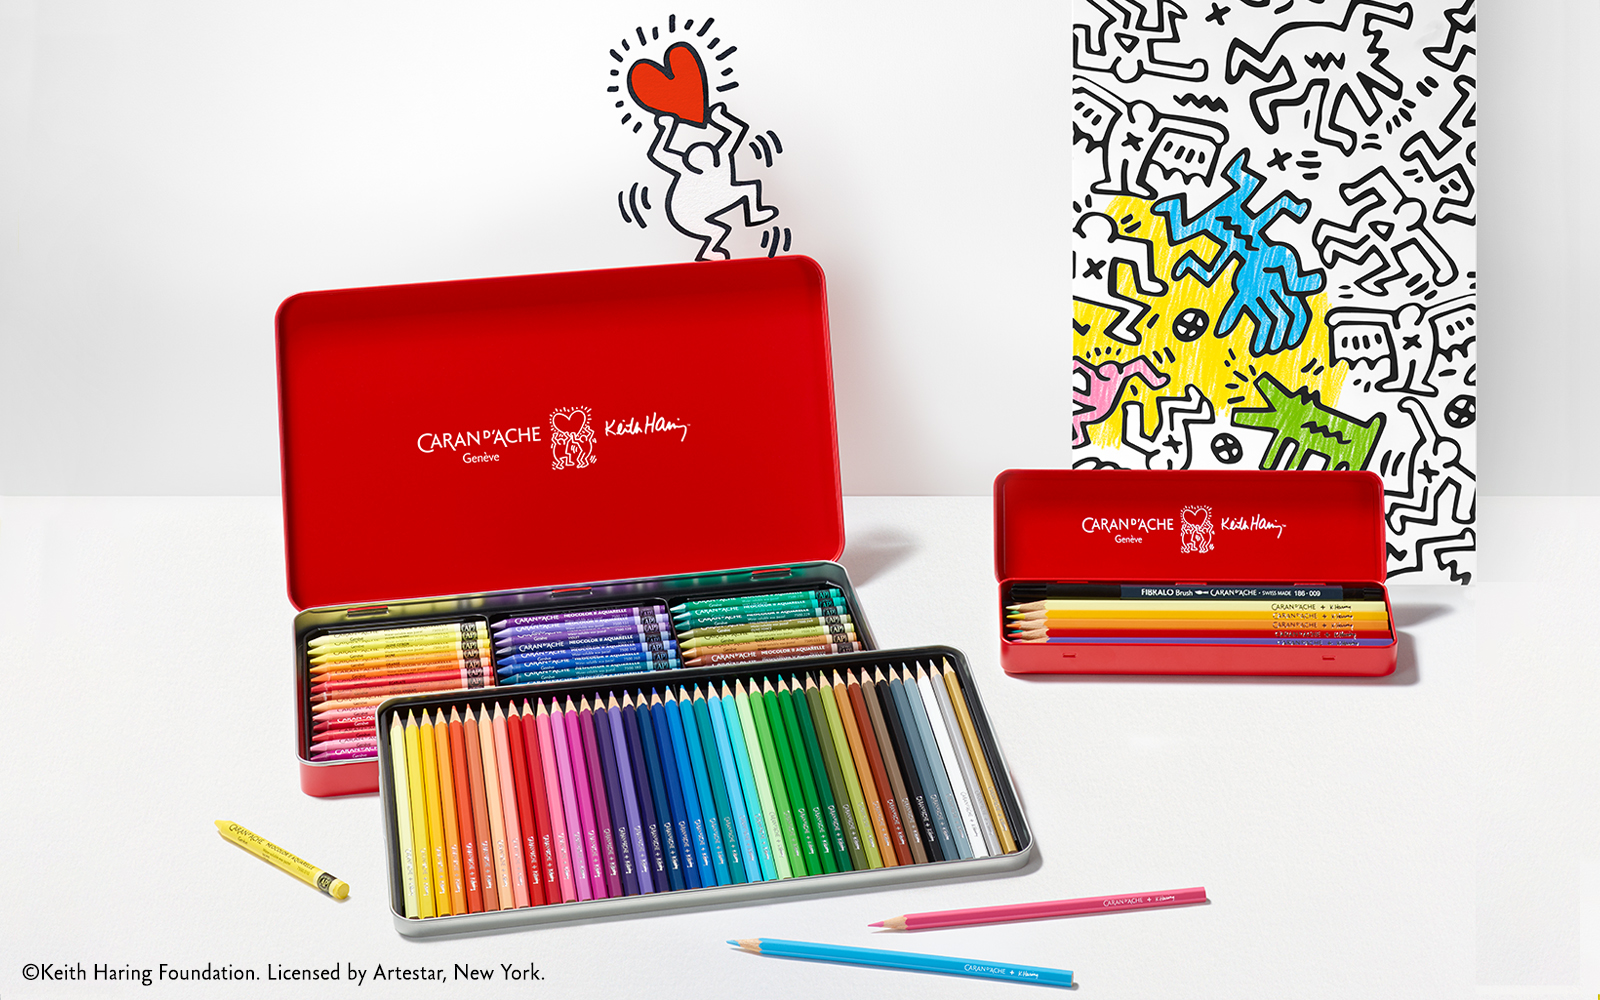 Keith haringâ special editions i caran dache